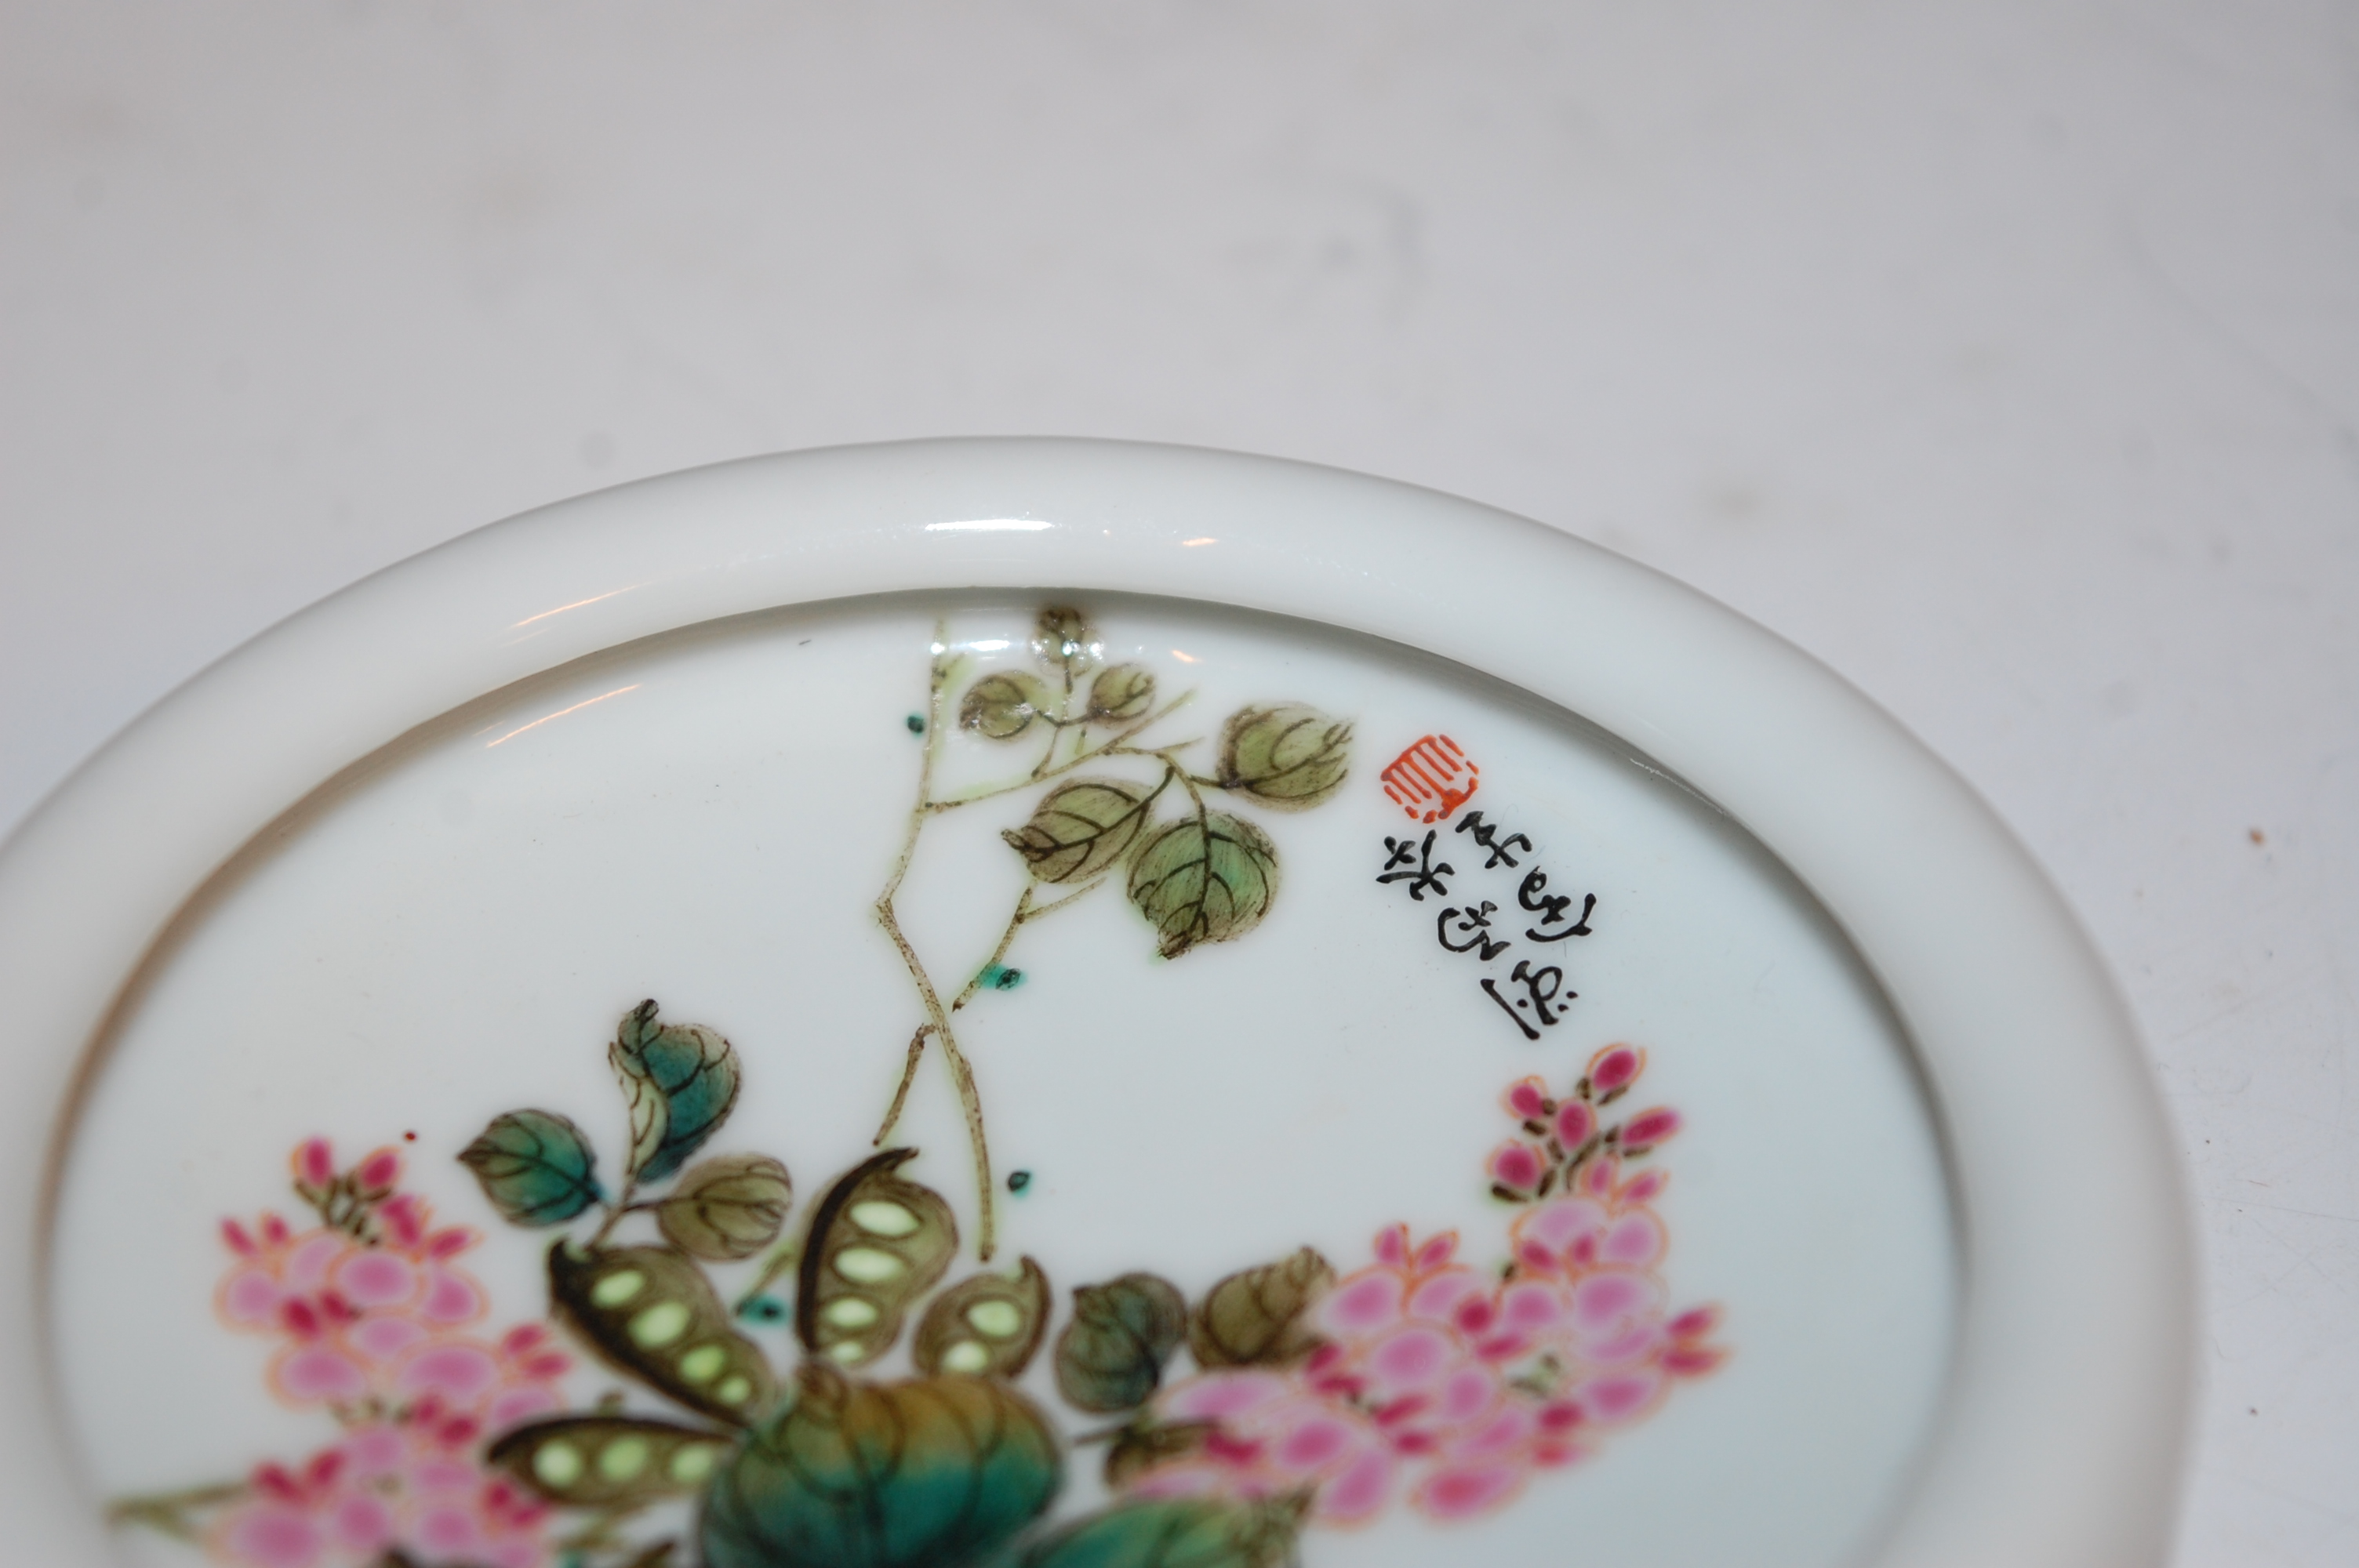 A Chinese glazed stoneware famille rose finger bowl, signed in script, attributed to Liu Yucen, dia. - Image 4 of 7